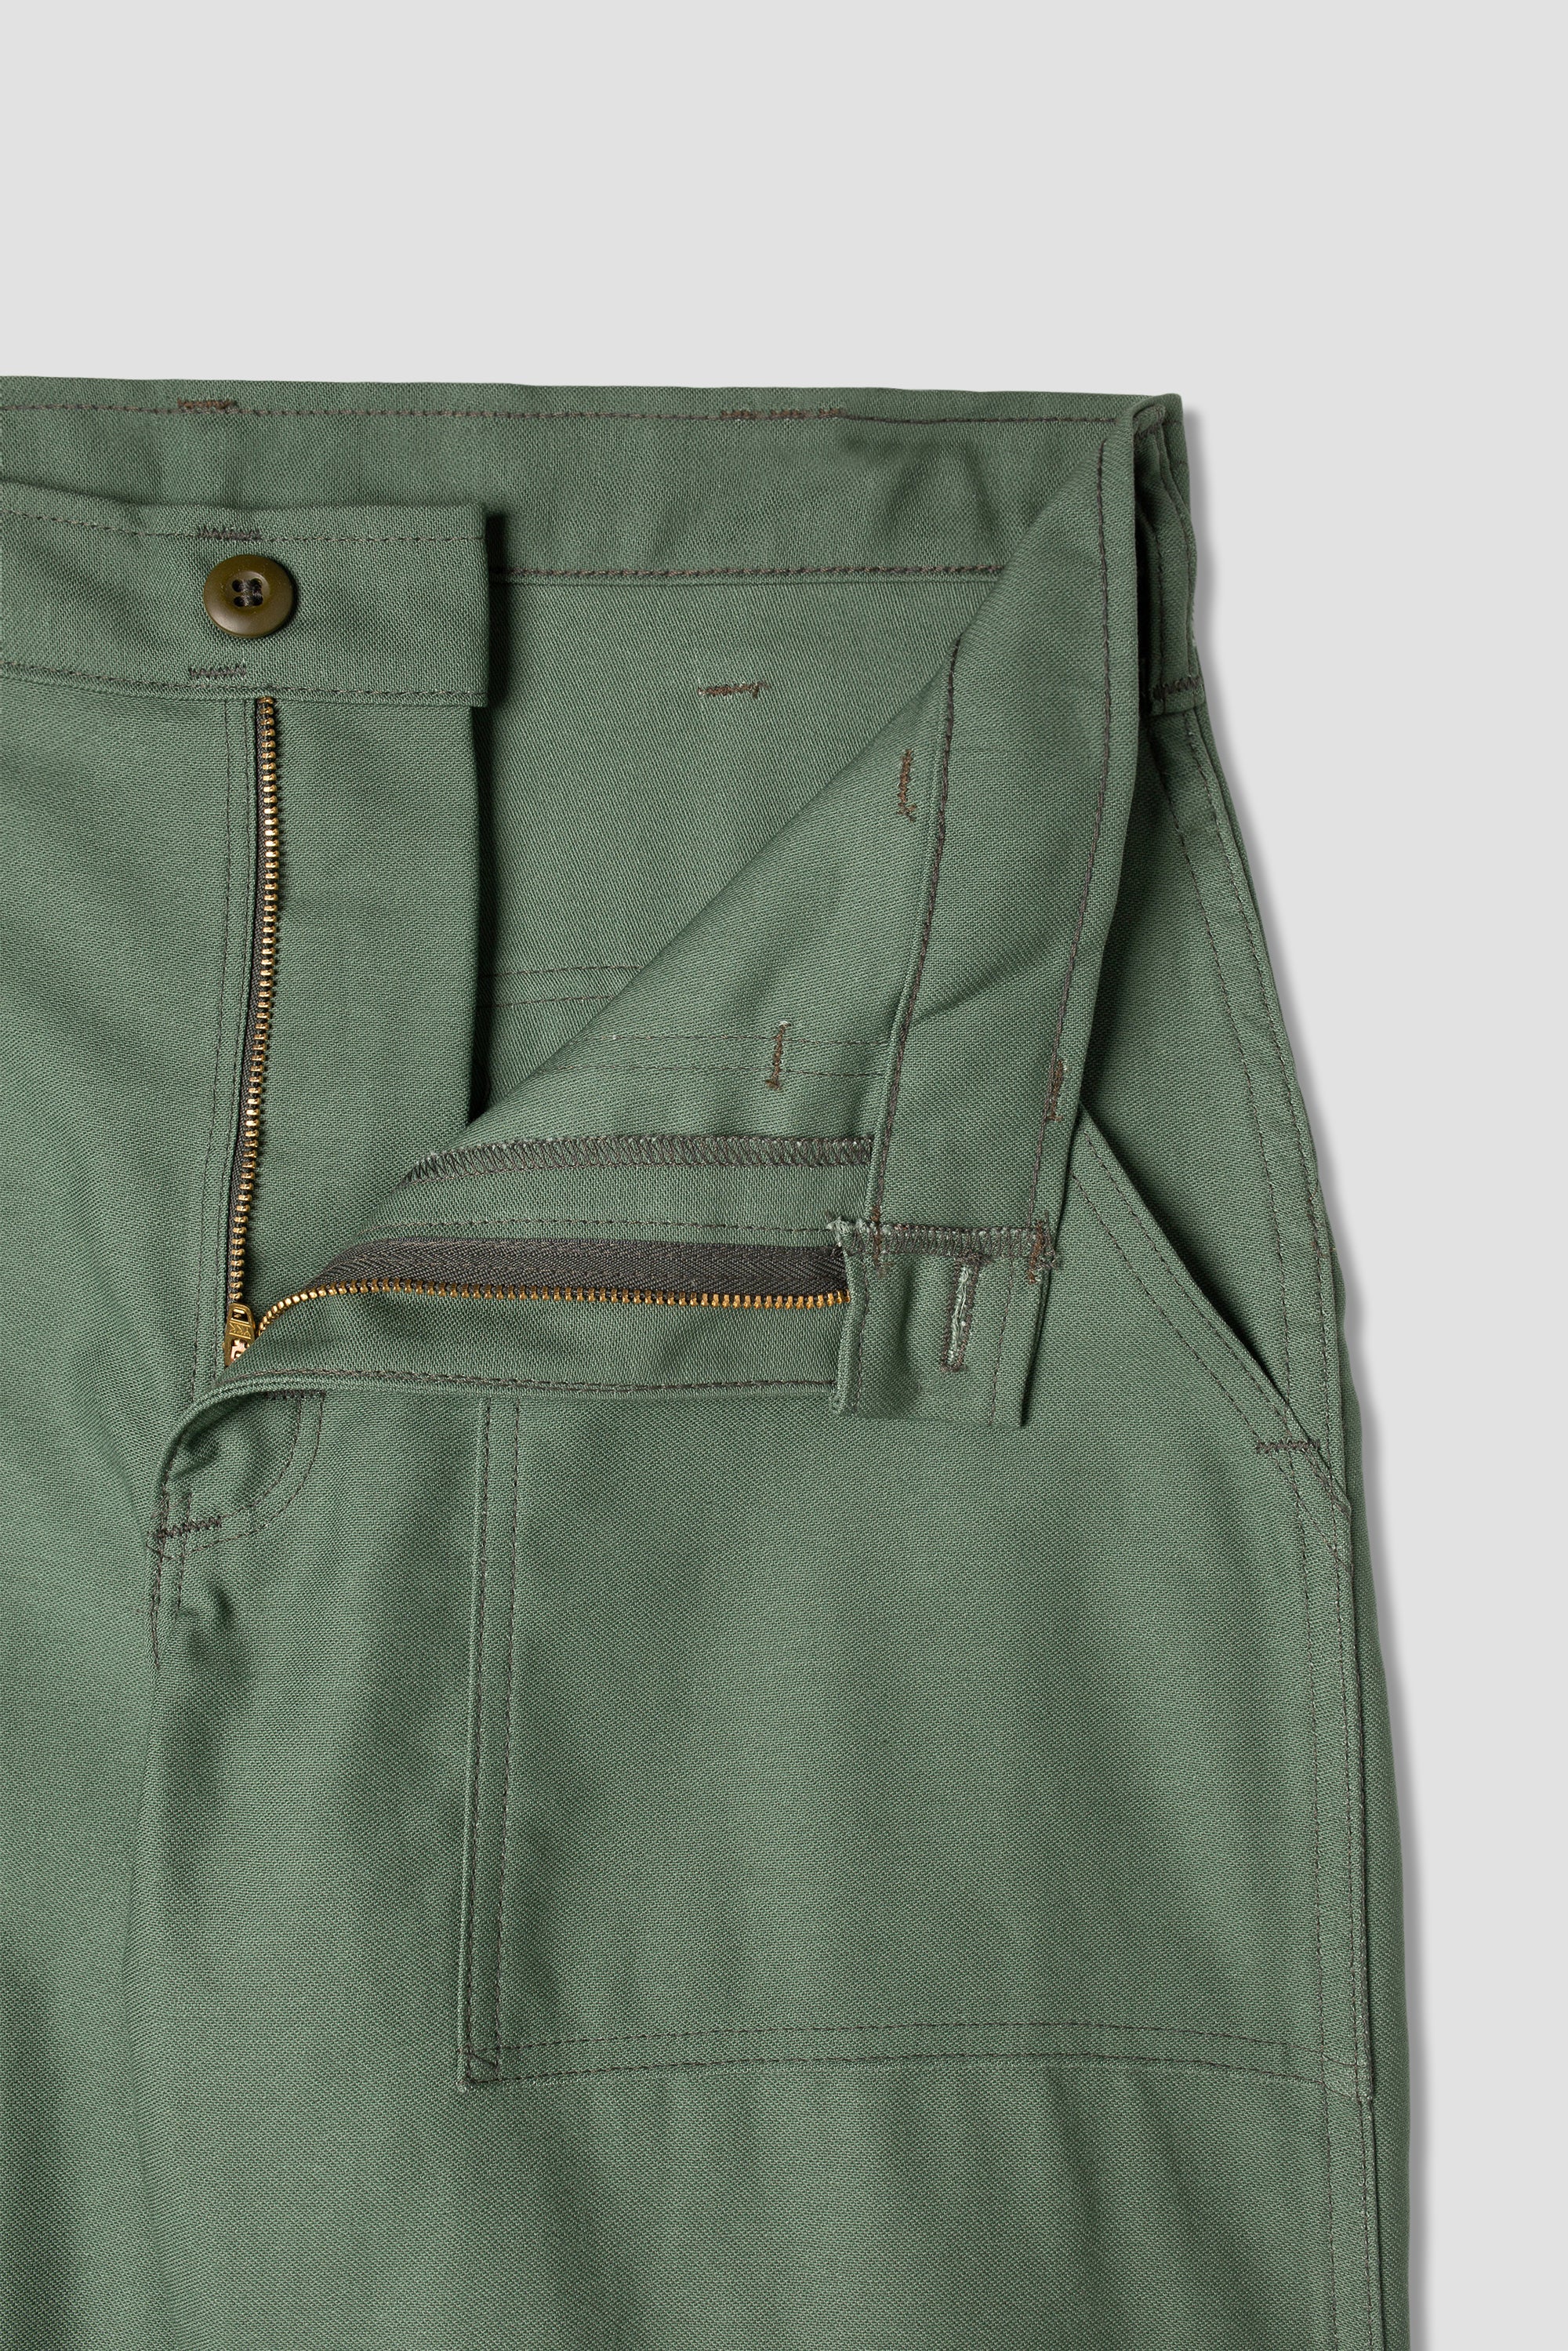 Fatigue Short (Olive Sateen 8.5oz) – Stan Ray